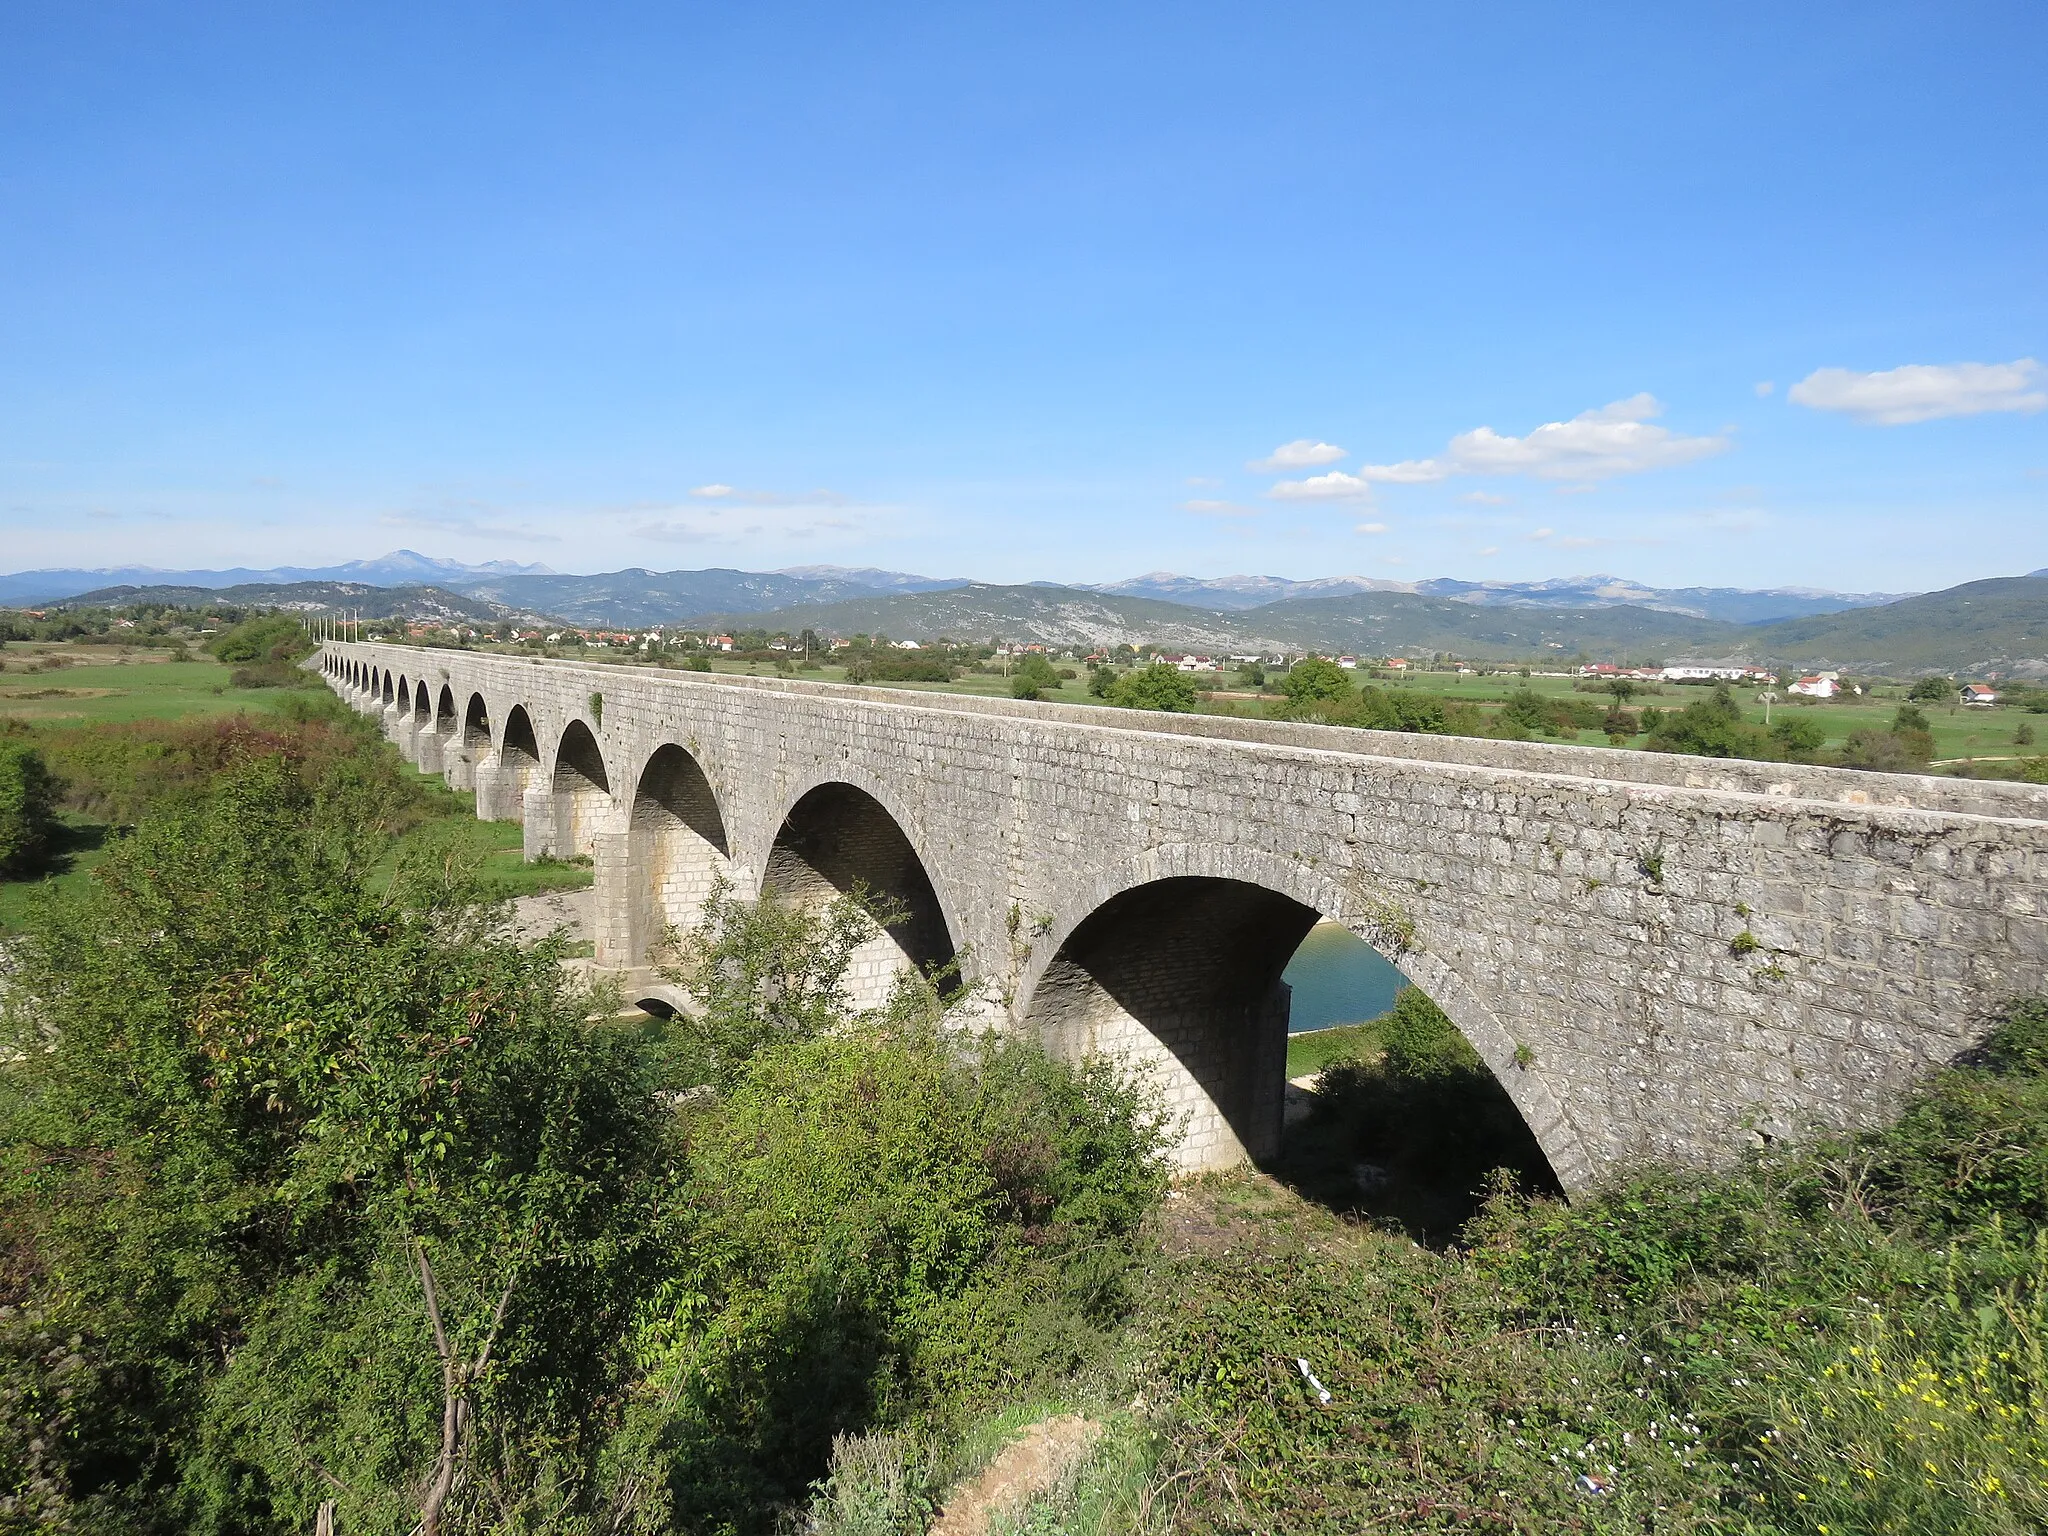 Photo showing: Carev most, the Tsar's Bridge, Nikšić, Montenegro, seen from the southern end.